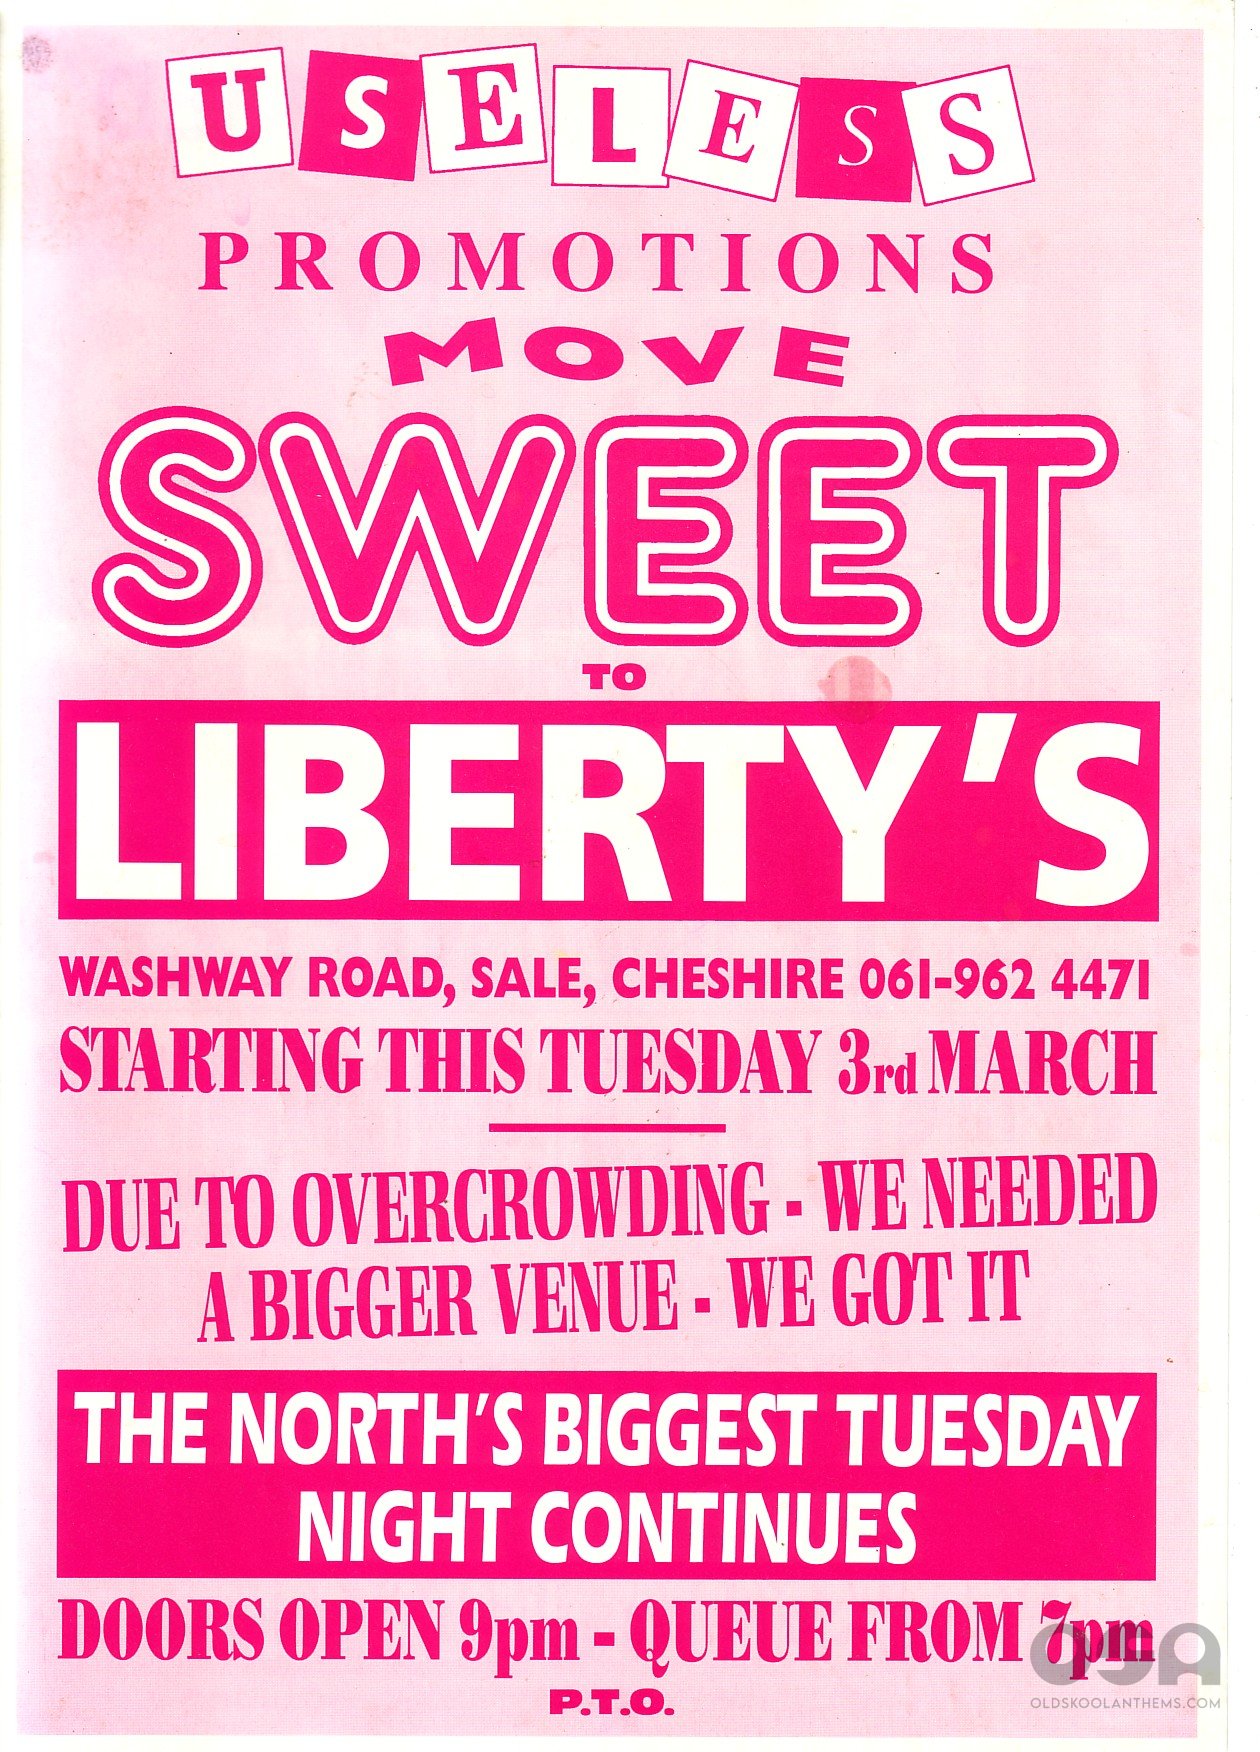 1_Sweet___Libertys_Sale_Manchester_Starts_Tue_3rd_March.jpg